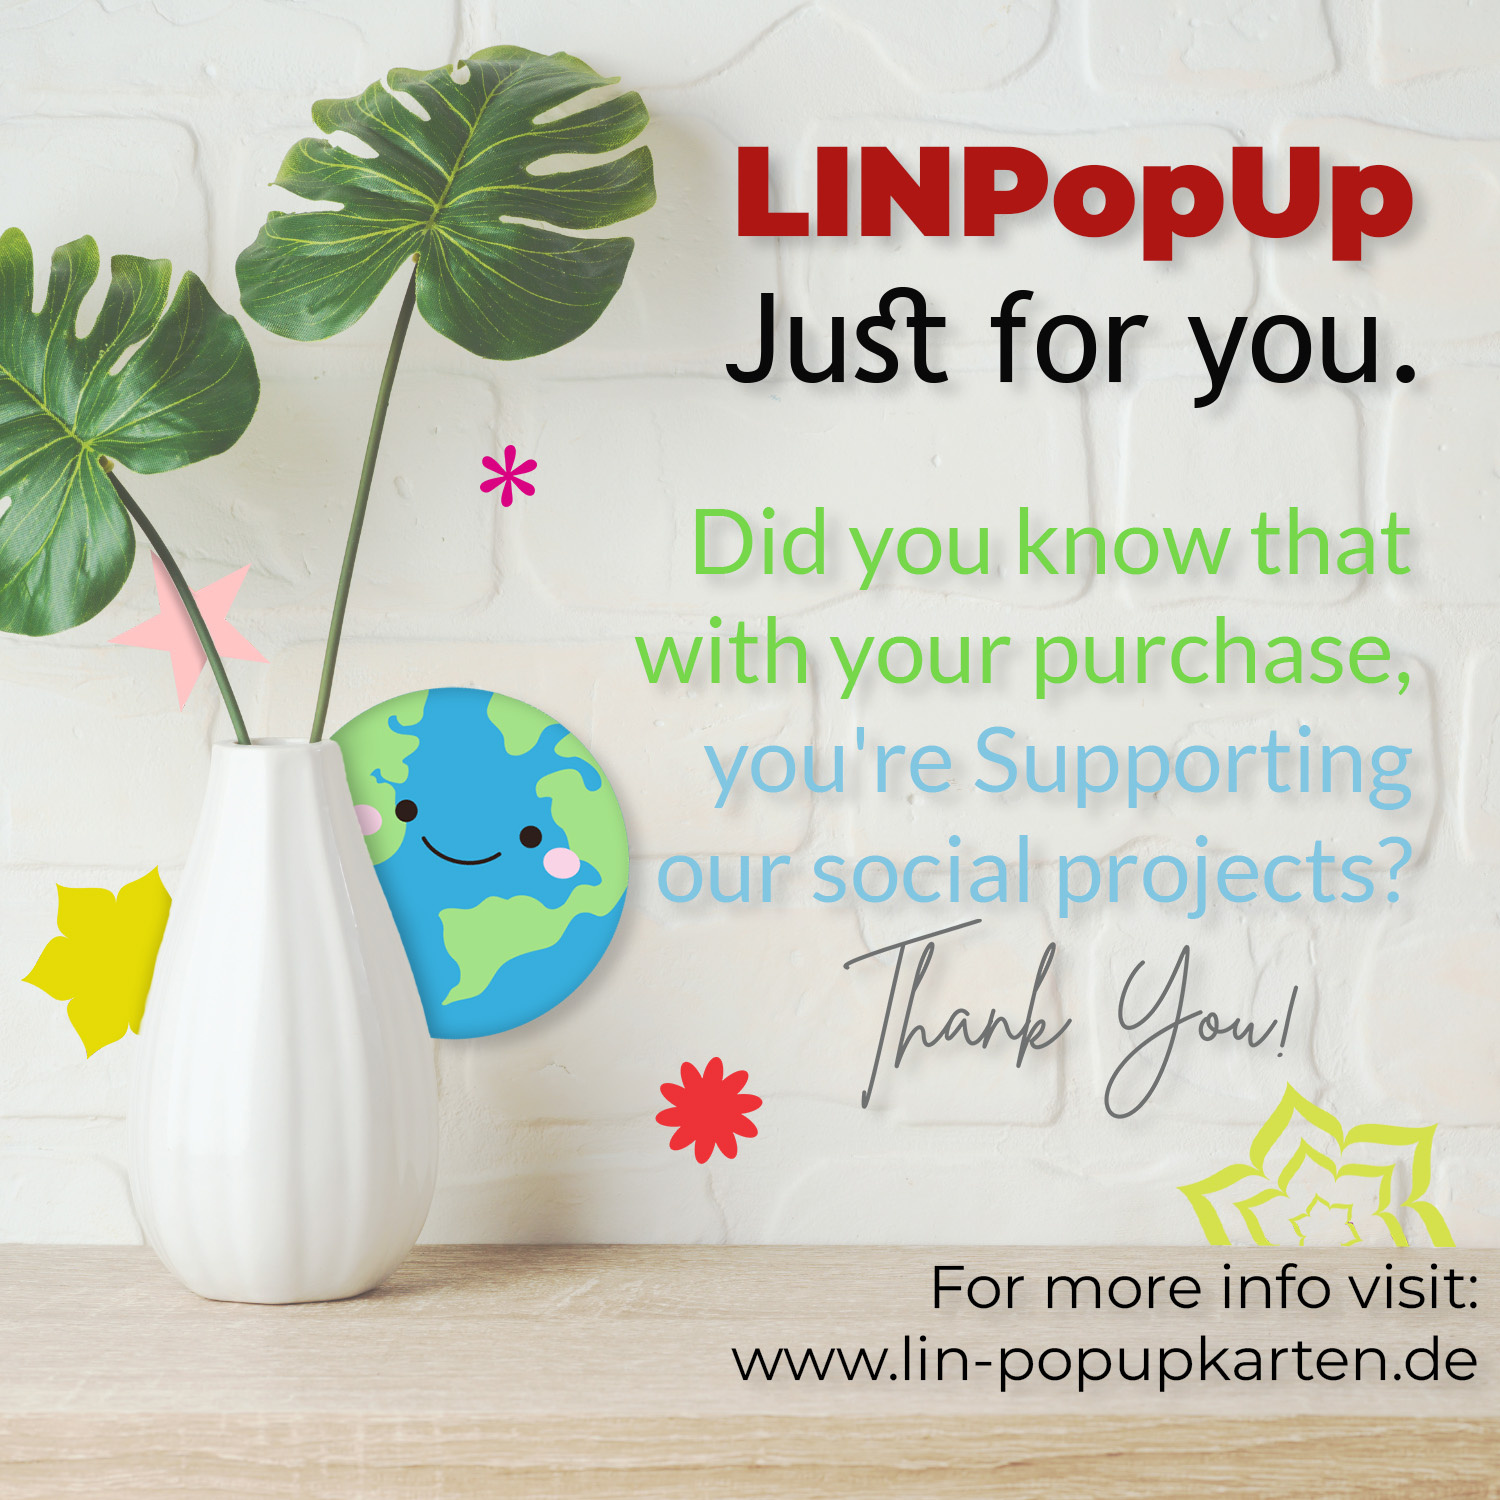 LINPOPUP Pop Up Card, greeting card, greeting card nature, garden, pond, voucher, tree, weeping willow, LIN17593, LINPopUp®, N347